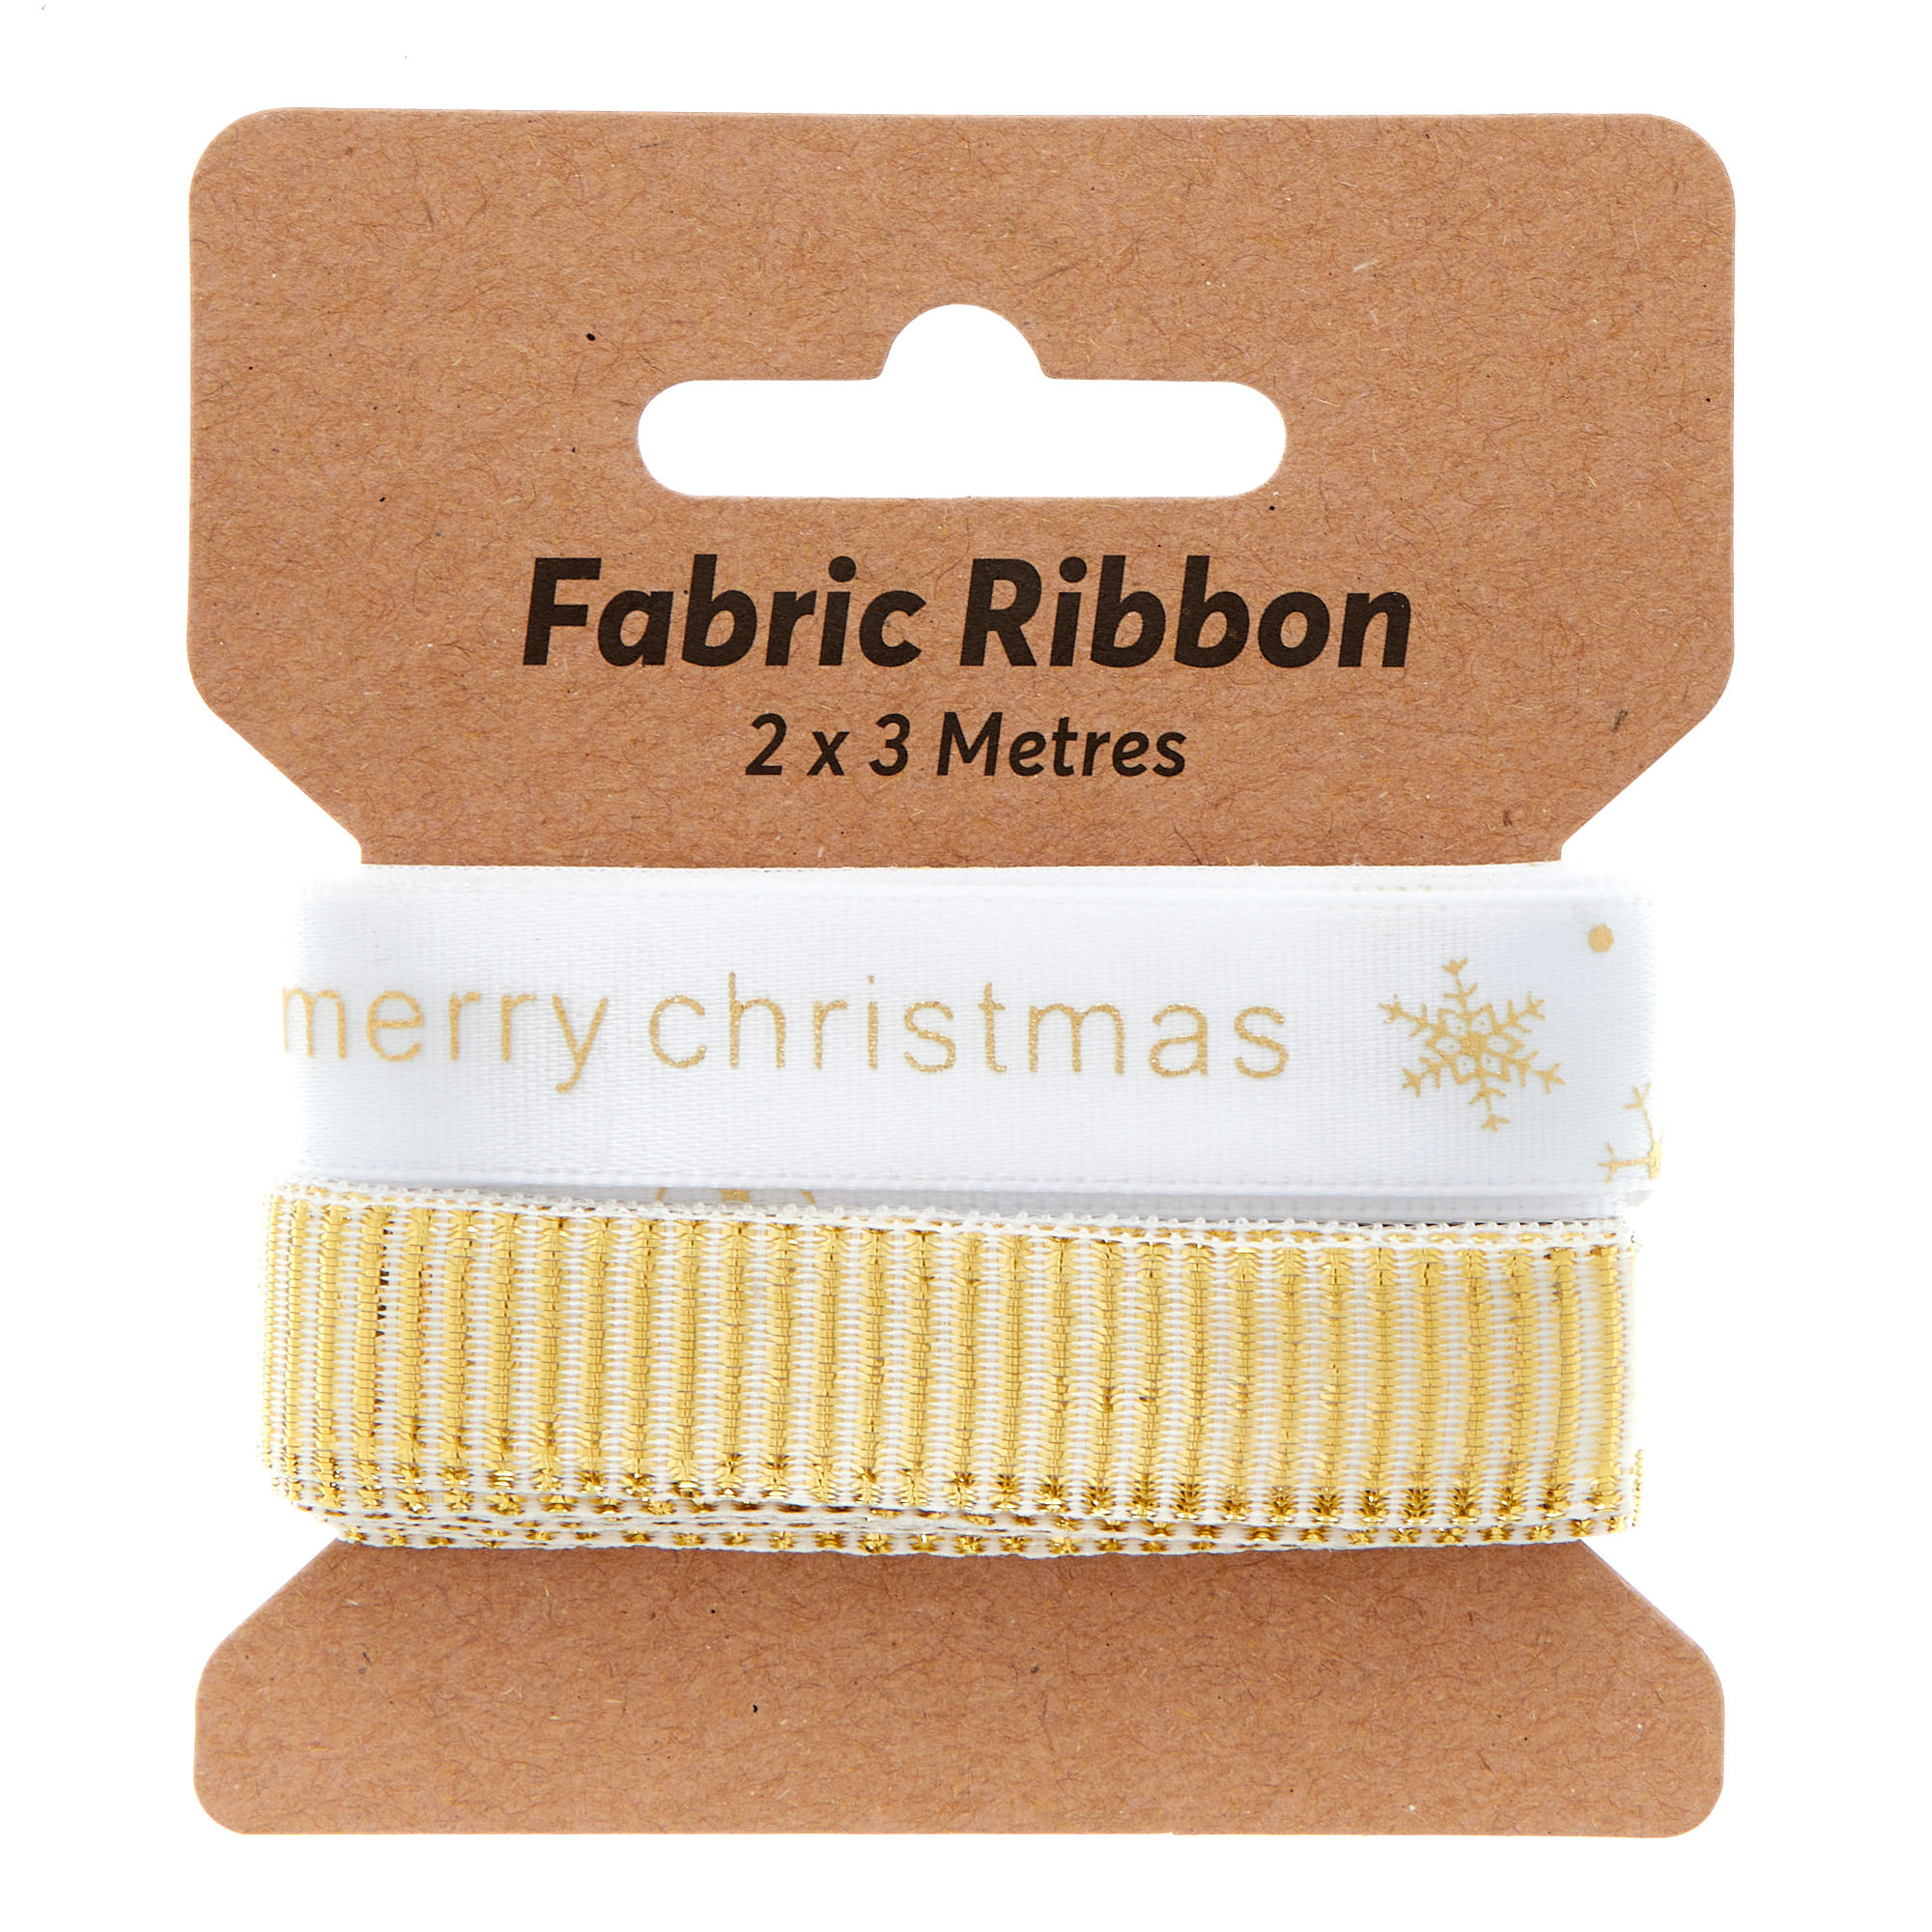 Merry Christmas Gold Fabric Ribbon - Pack of 2